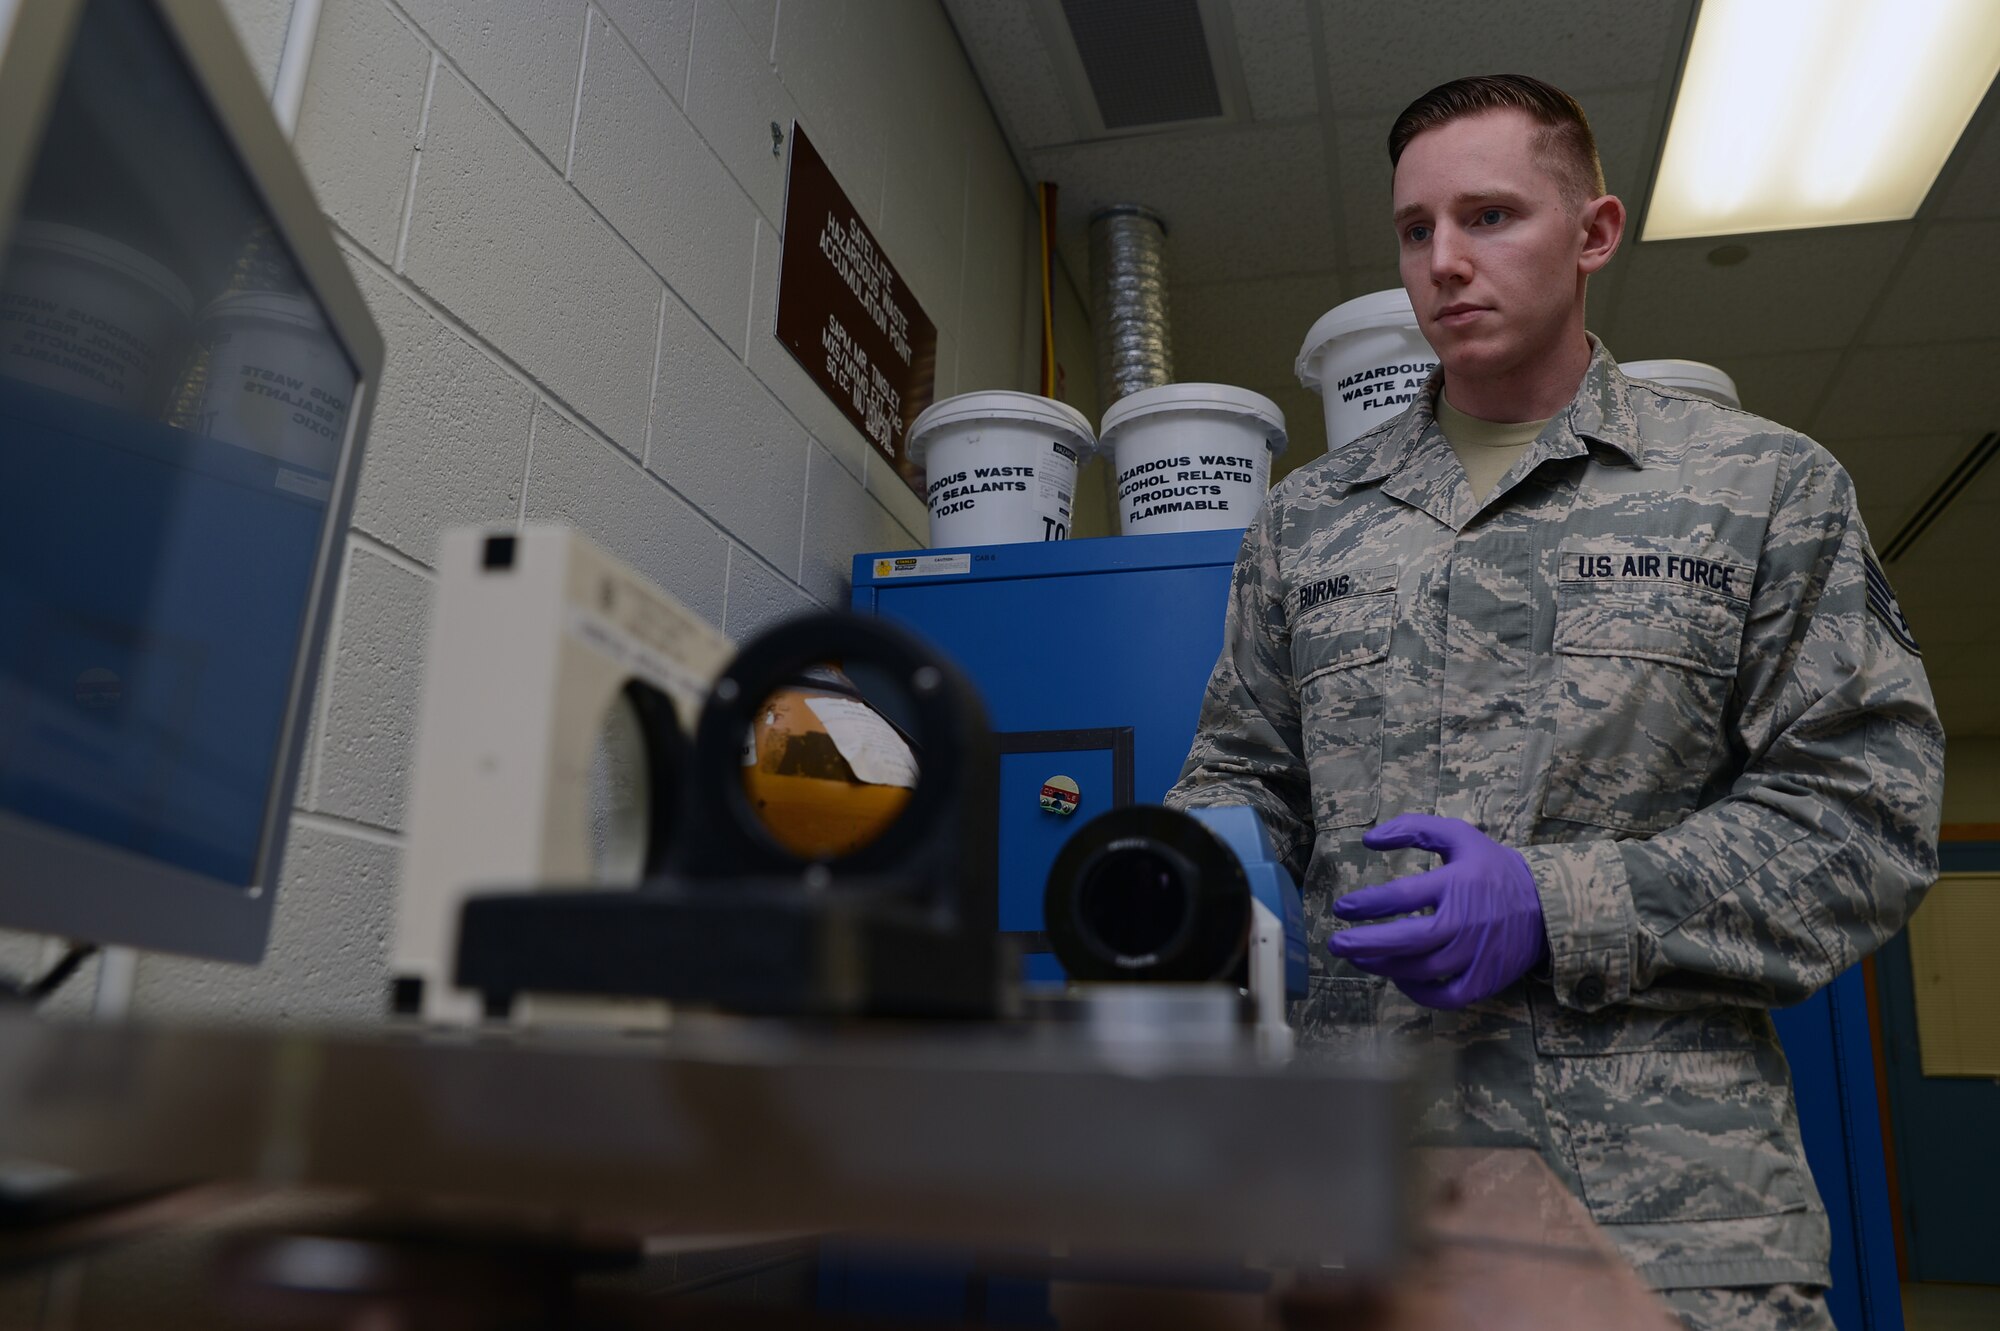 Staff Sgt. Jeff Burns, 62nd Maintenance Squadron precision measurement equipment laboratory technician calibrates a piece of equipment June 7, 2016 at Joint Base Lewis-McChord, Wash. The PMEL shop at JBLM provides services for customers throughout the Pacific Northwest. (U.S. Air Force photo/Senior Airman Jacob Jimenez) 